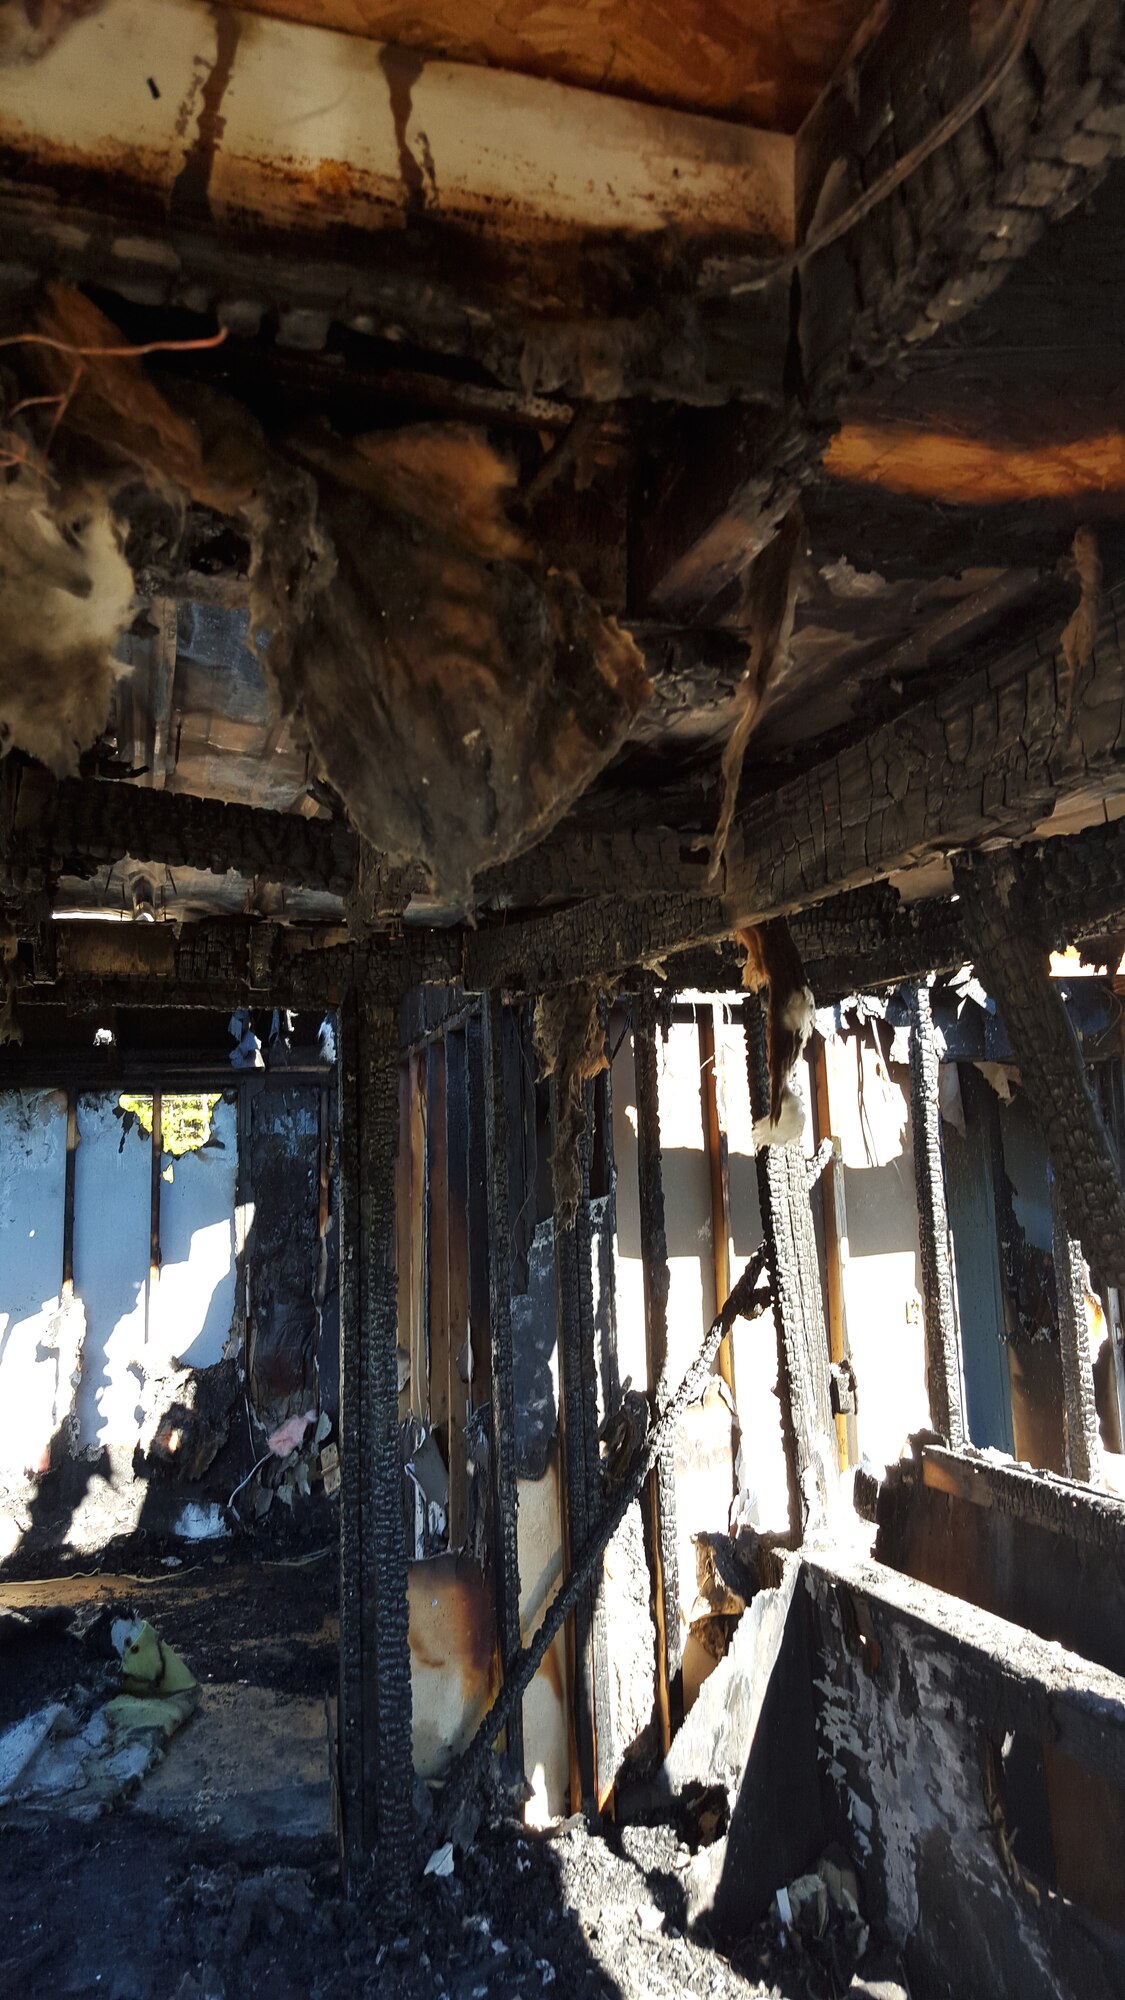 The charred remnants of Joe and Yvonne Mason’s house remain standing, Oct. 17, 2015, in Mar-Mac, North Carolina.  The house caught fire Oct. 11 and was a complete loss for the family. Since then, their neighbor, Tech. Sgt. Justin Manning, 4th Equipment Maintenance Squadron aerospace ground equipment technician, has worked to help the family clear the rubble and make sure they are taken care of. (Courtesy photo)